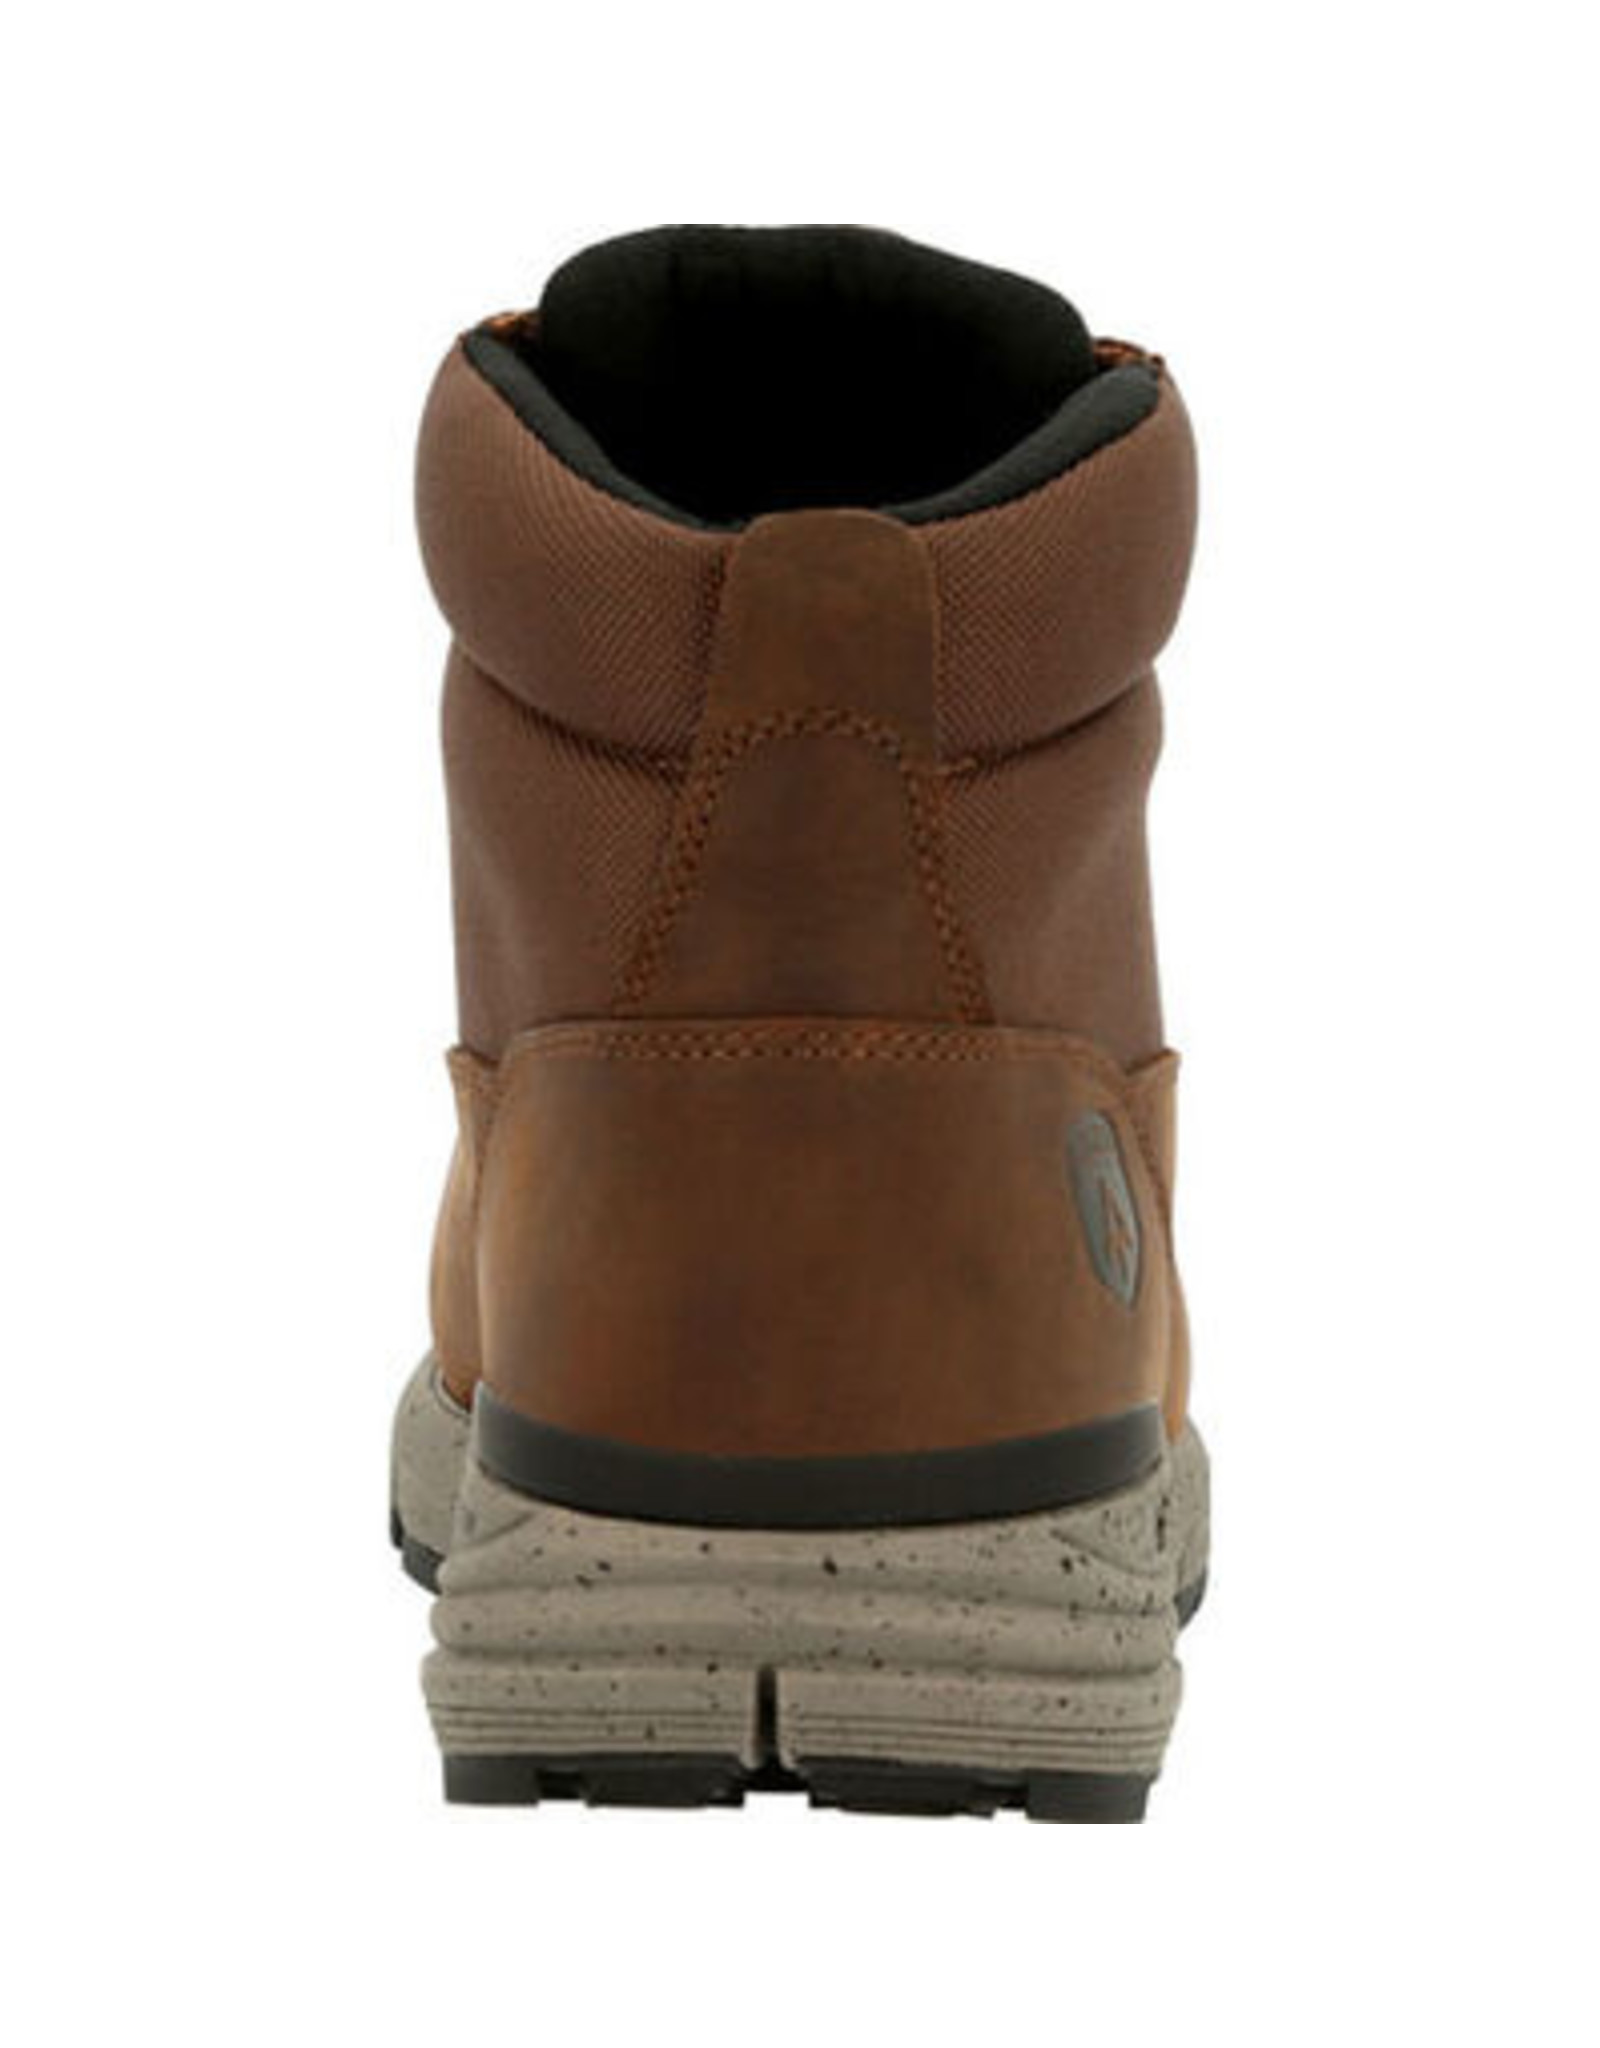 Boots-Men ROCKY Rugged AT Comp Toe RKK03